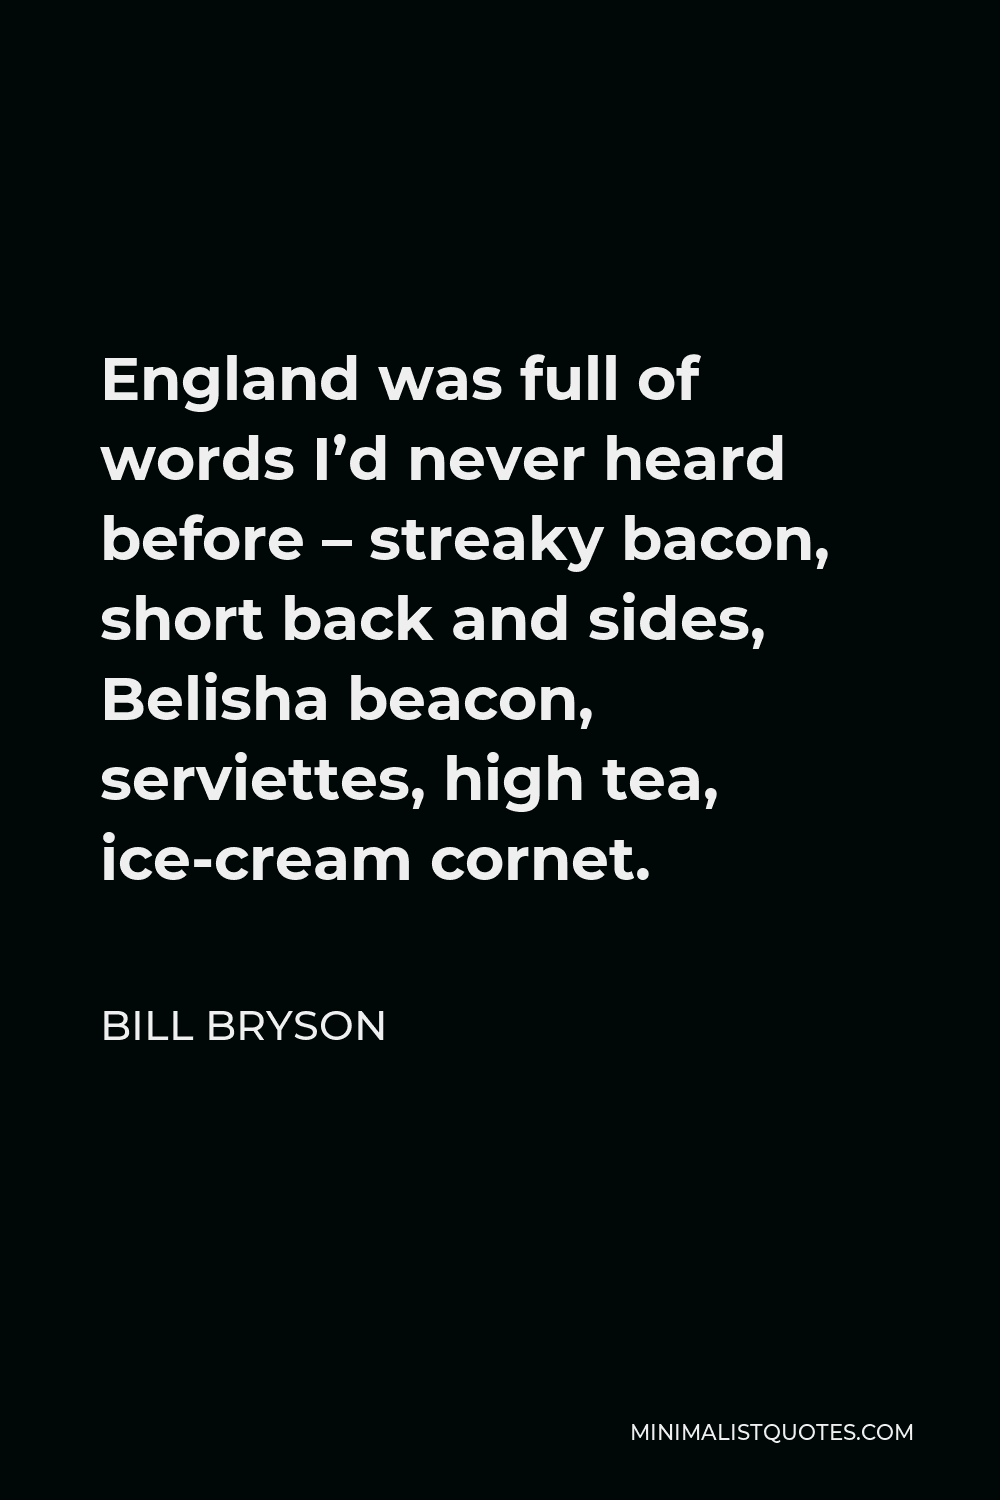 Bill Bryson Quote - England was full of words I’d never heard before – streaky bacon, short back and sides, Belisha beacon, serviettes, high tea, ice-cream cornet.